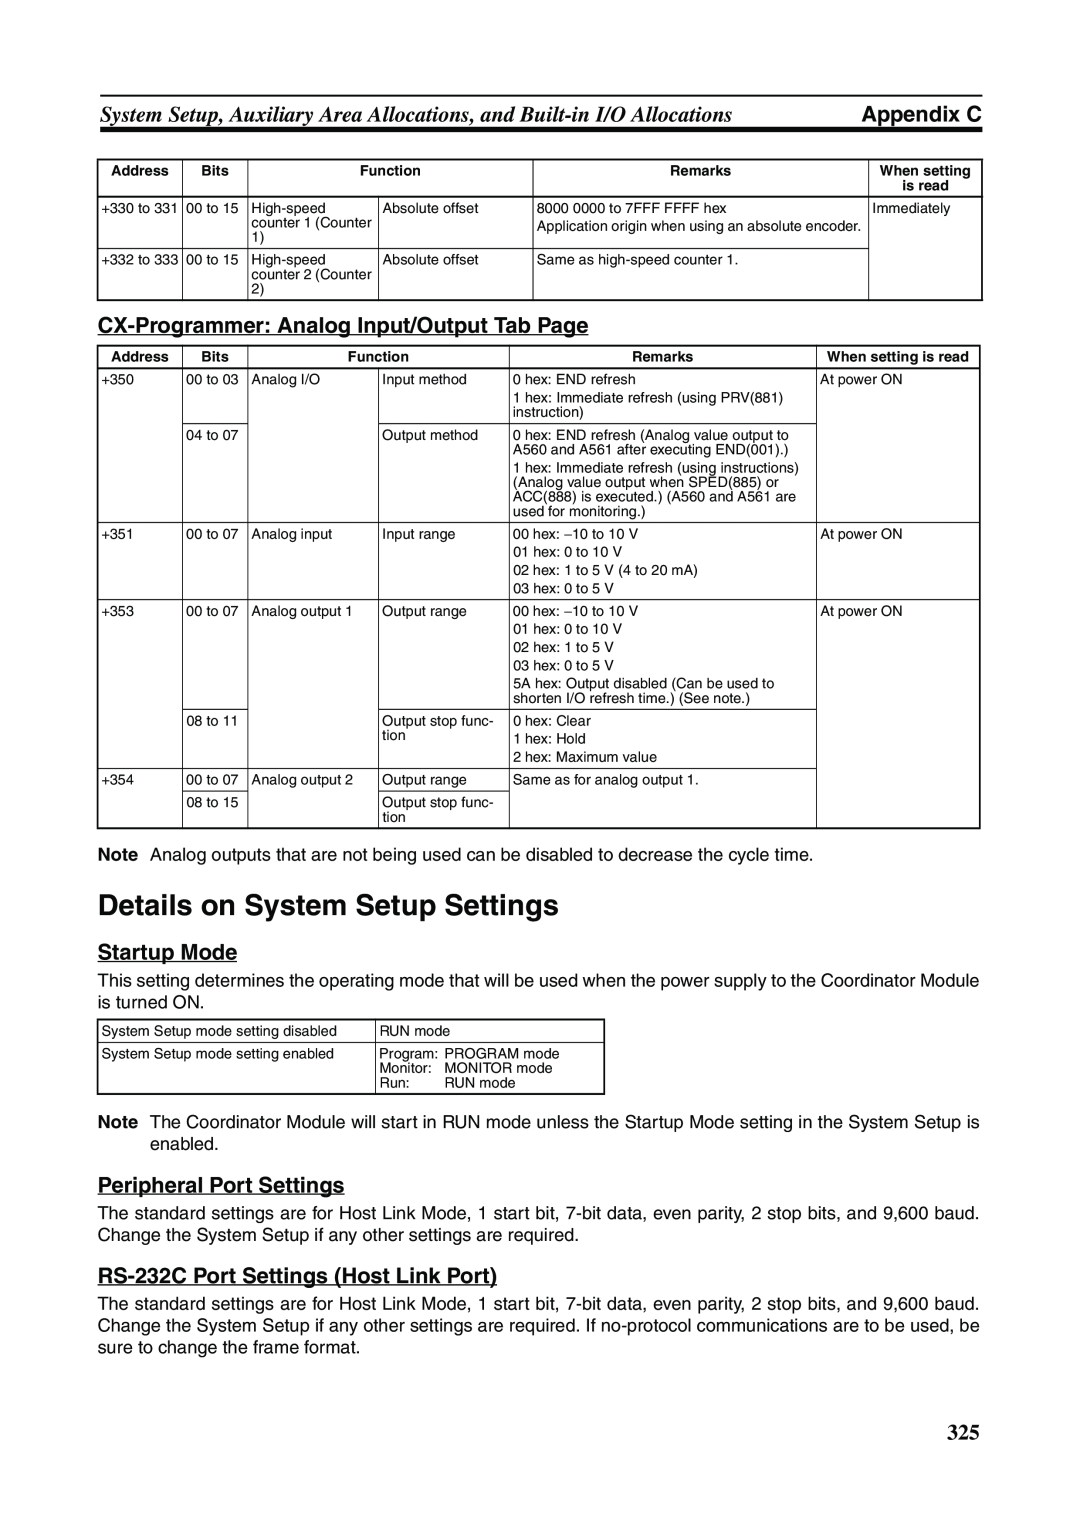 Omron FQM1-CM001 Details on System Setup Settings, Appendix C, CX-Programmer:Analog Input/Output Tab Page, Startup Mode 